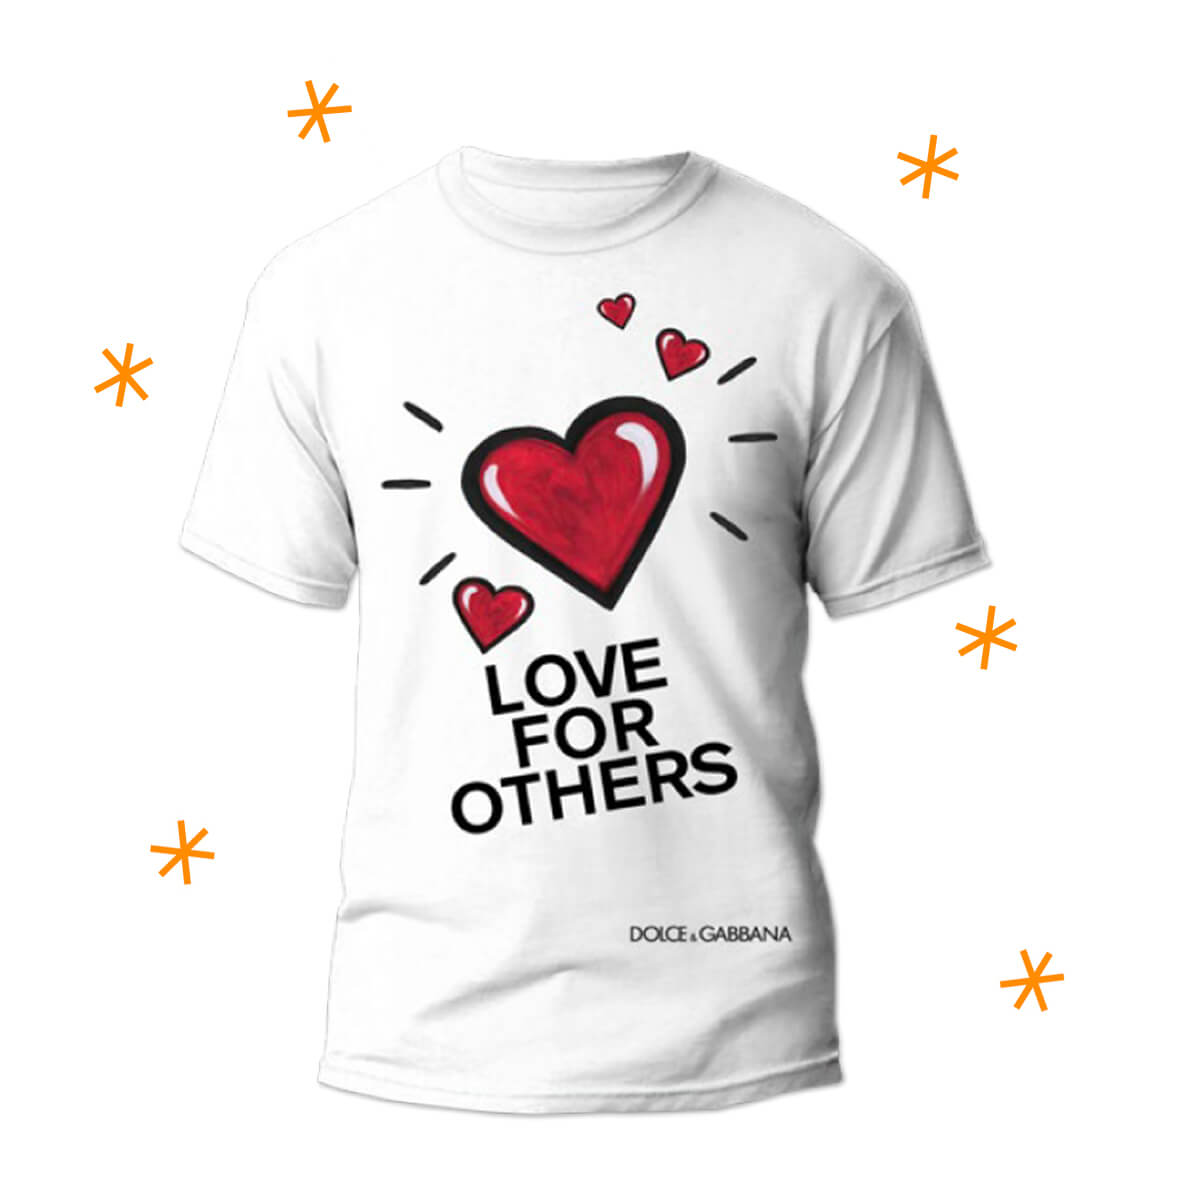 T-shirt LOVE FOR OTHERS Dolce & Gabbana